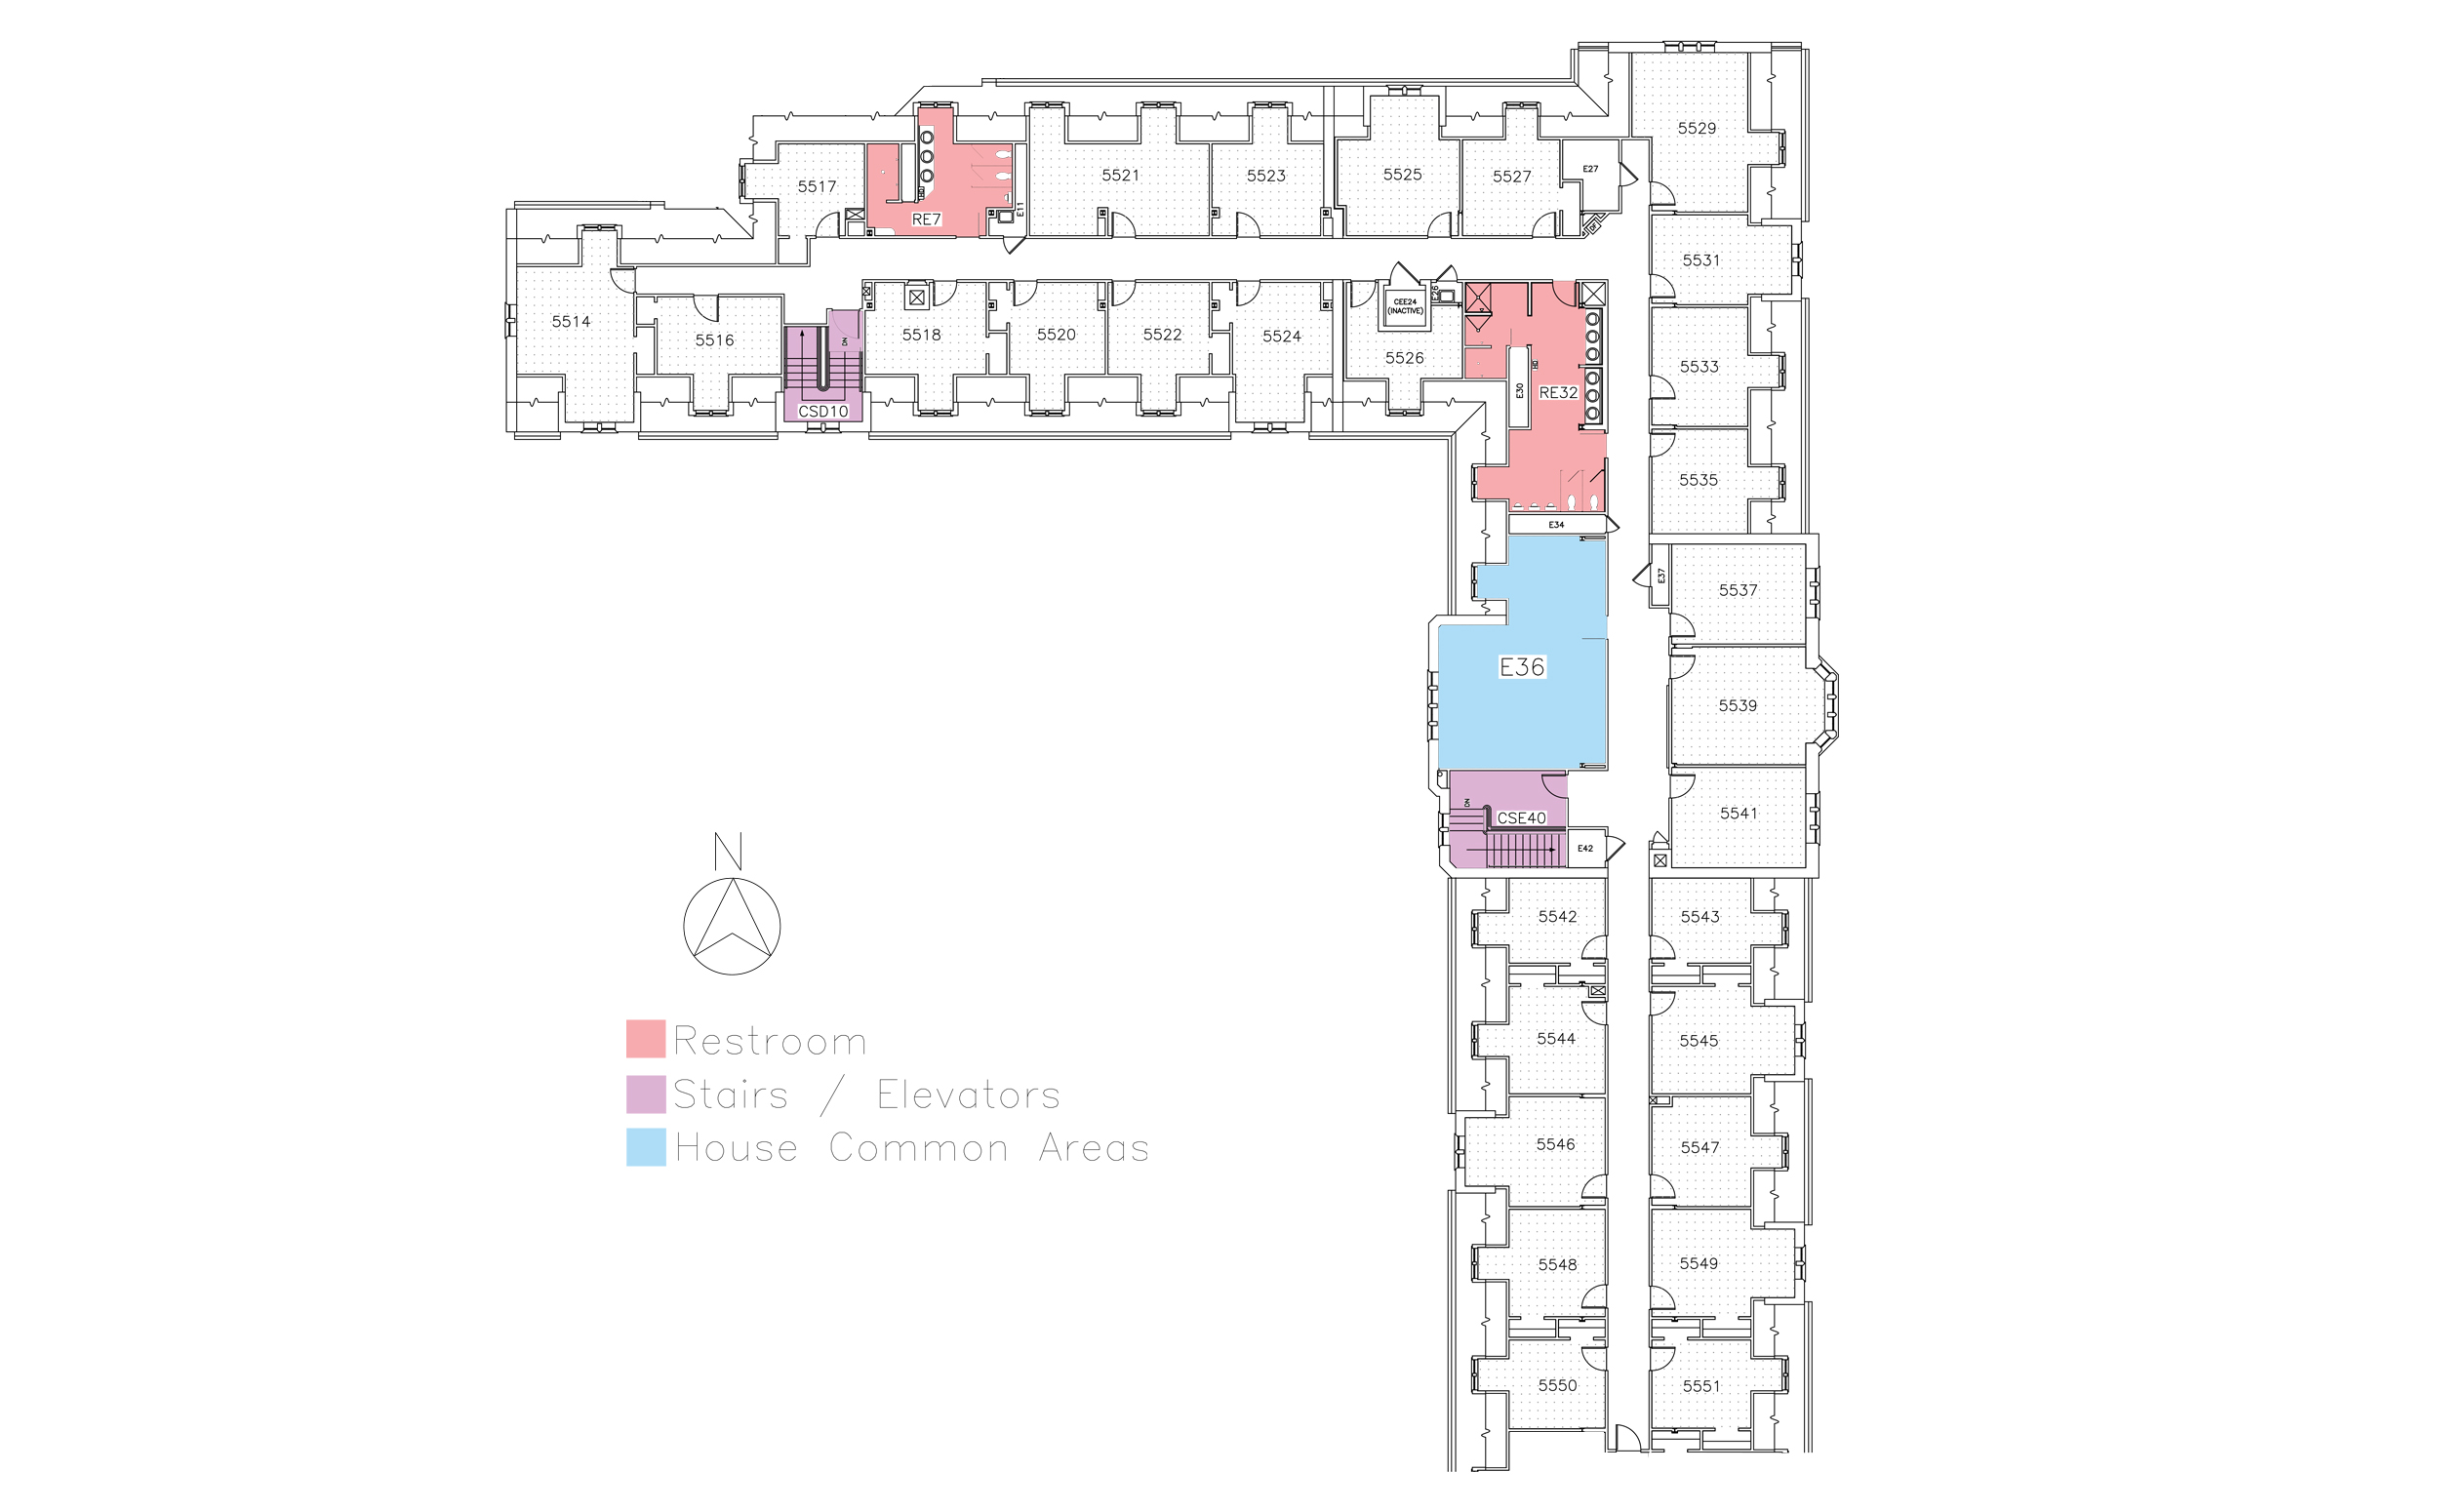 Niles-Foster House, fifth floor in Friley Hall floor plan. Identifies the location of rooms, bathrooms and common space.